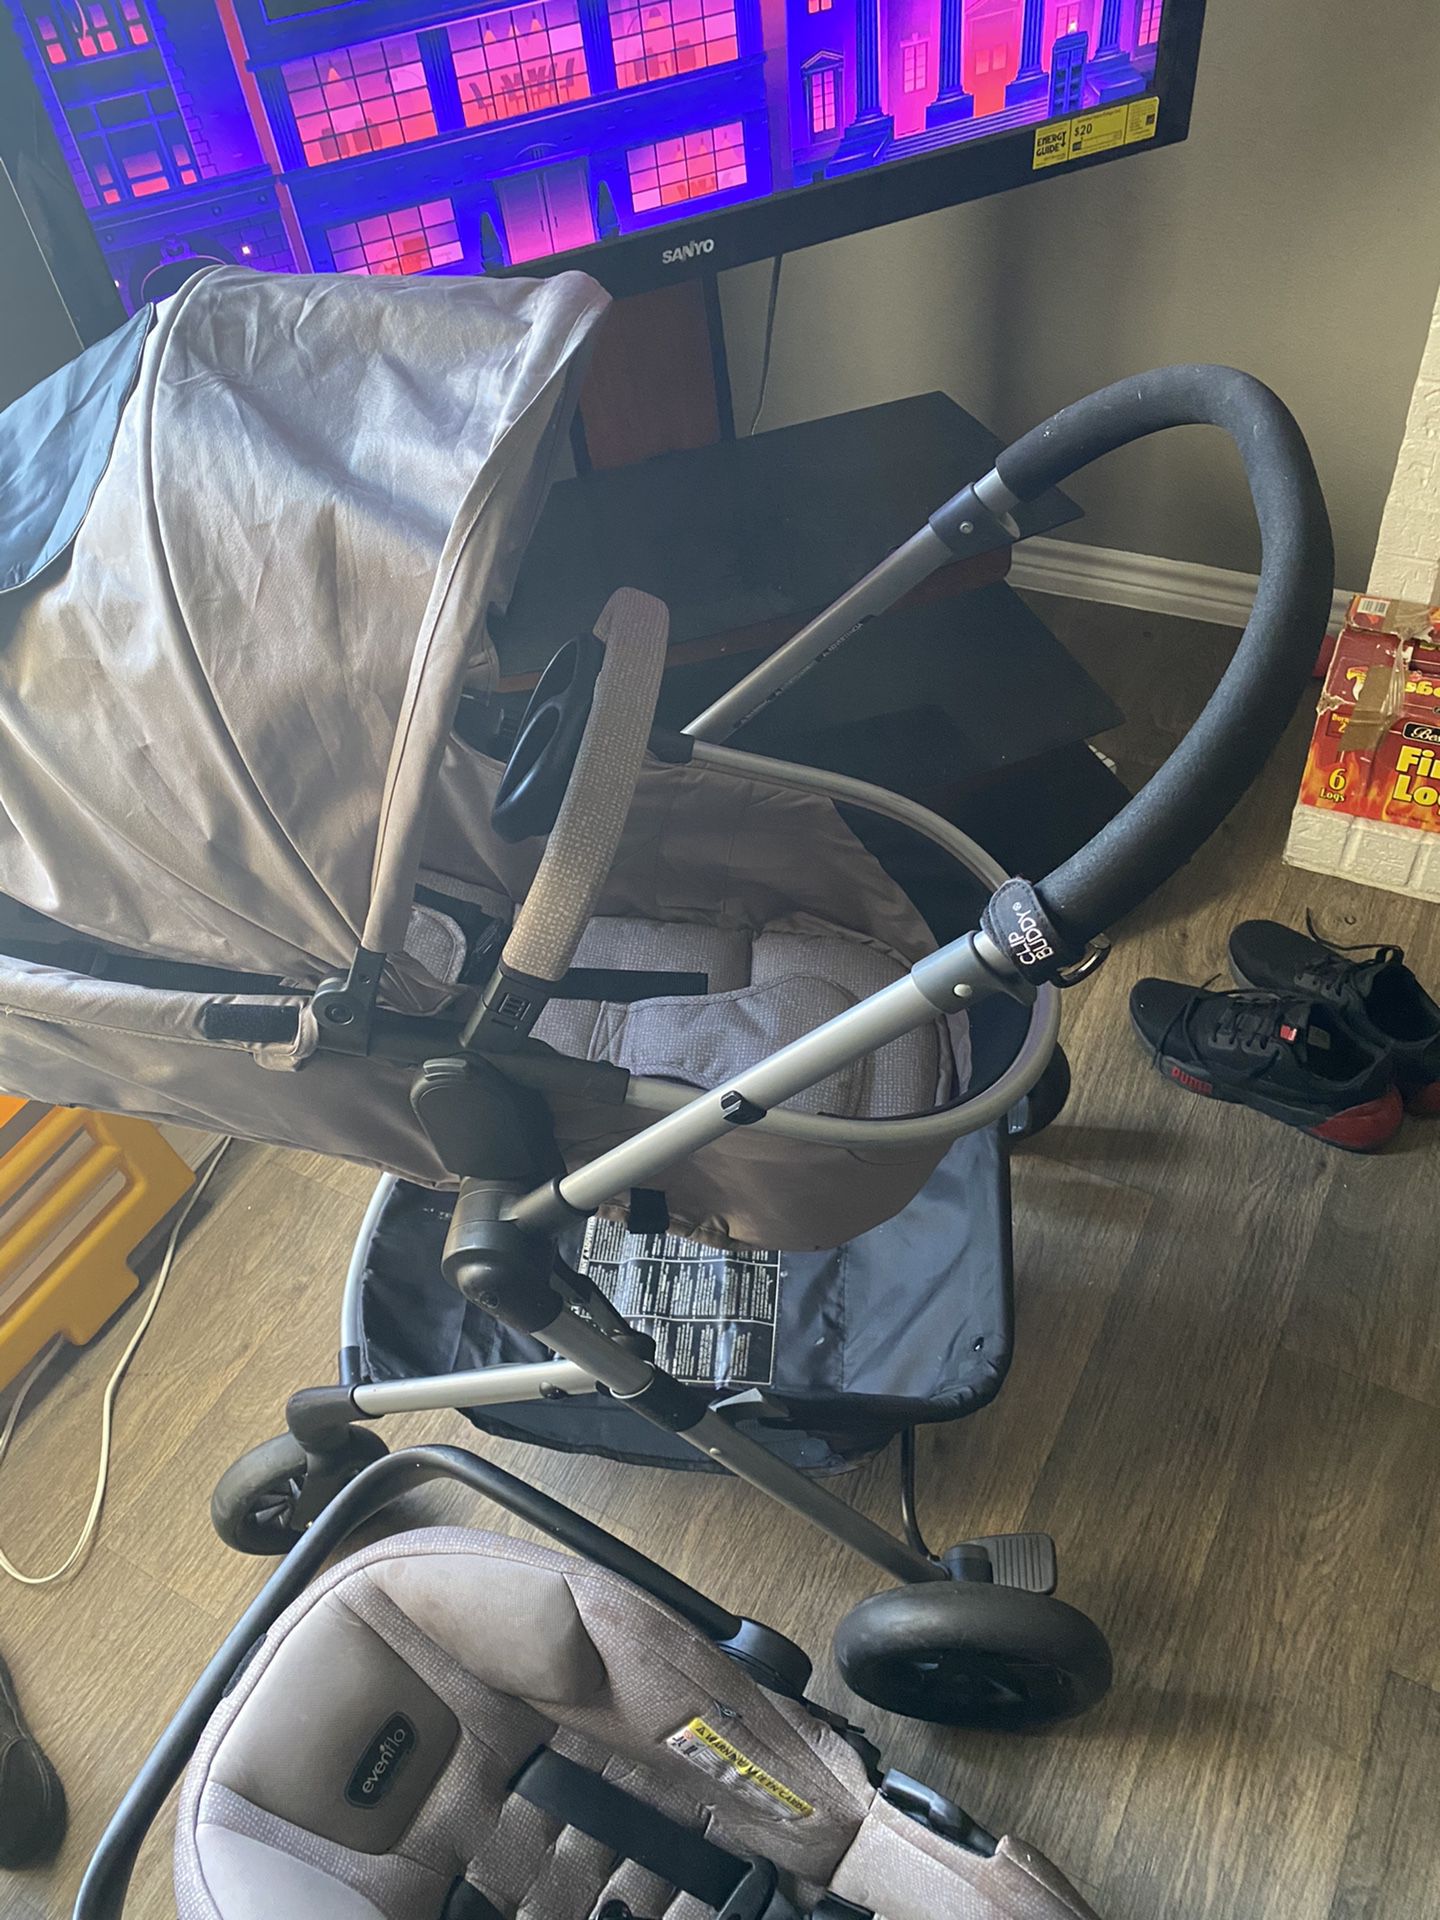 Even flow stroller and car sit